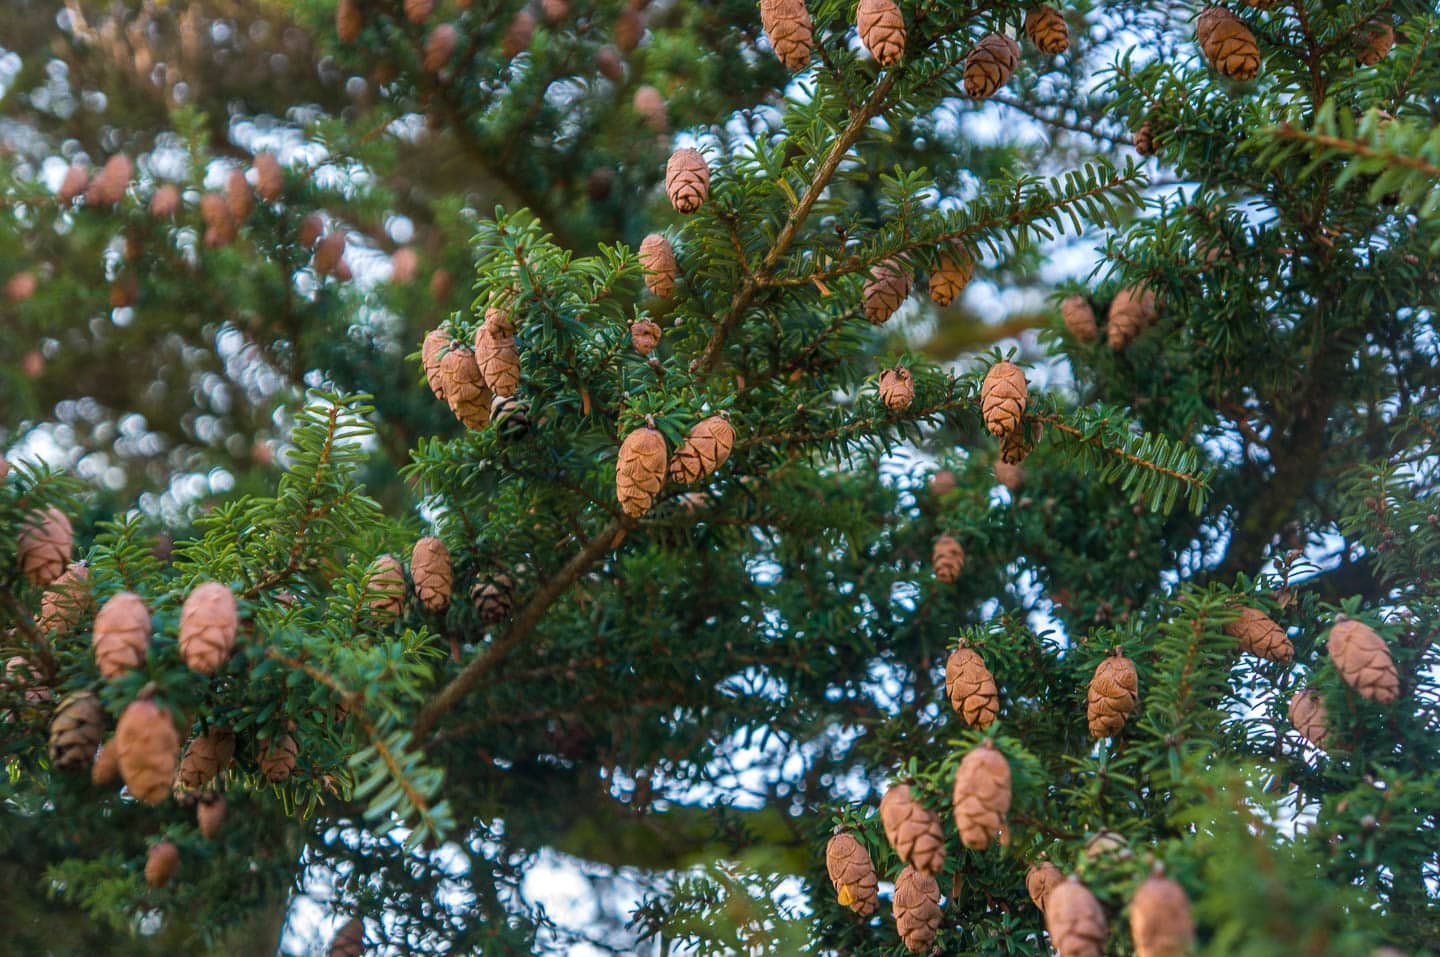 Canadian hemlock branches with pine cones